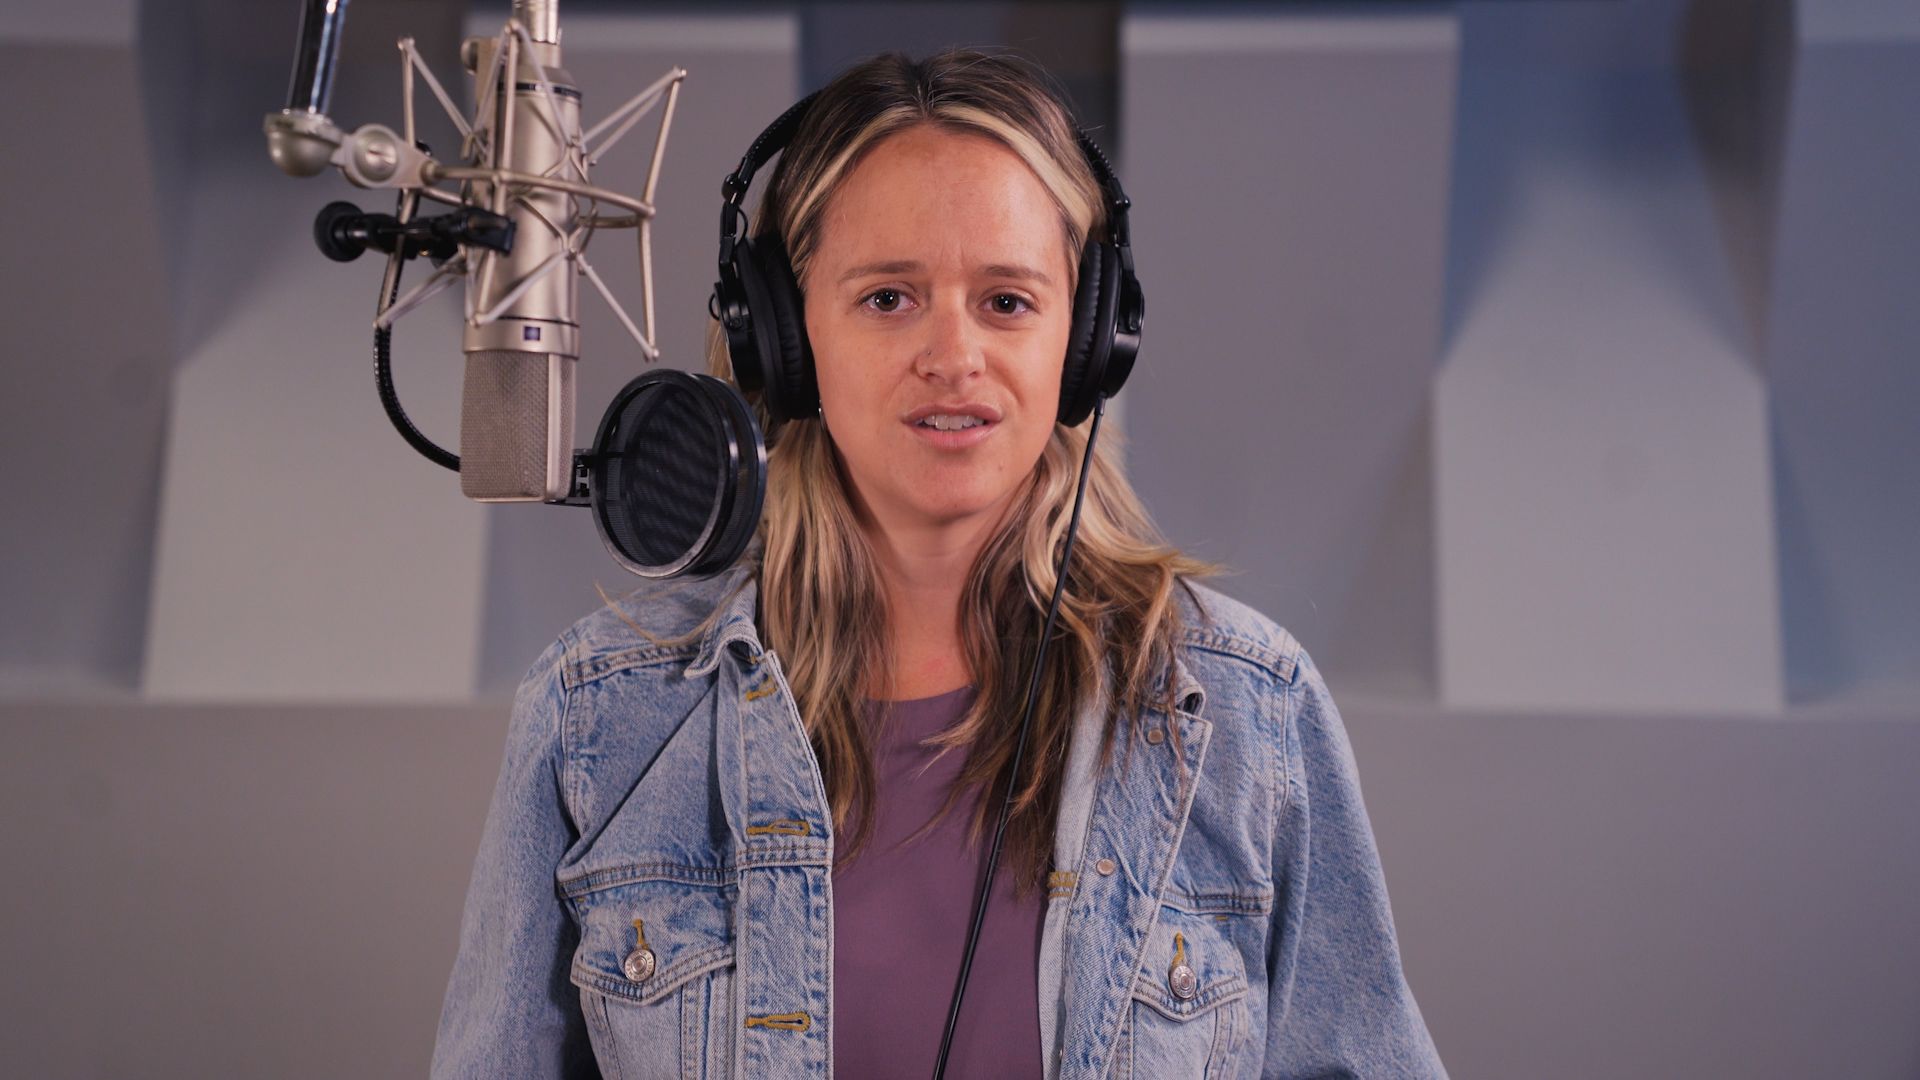 a woman wearing headphones is singing into a microphone in a recording studio .